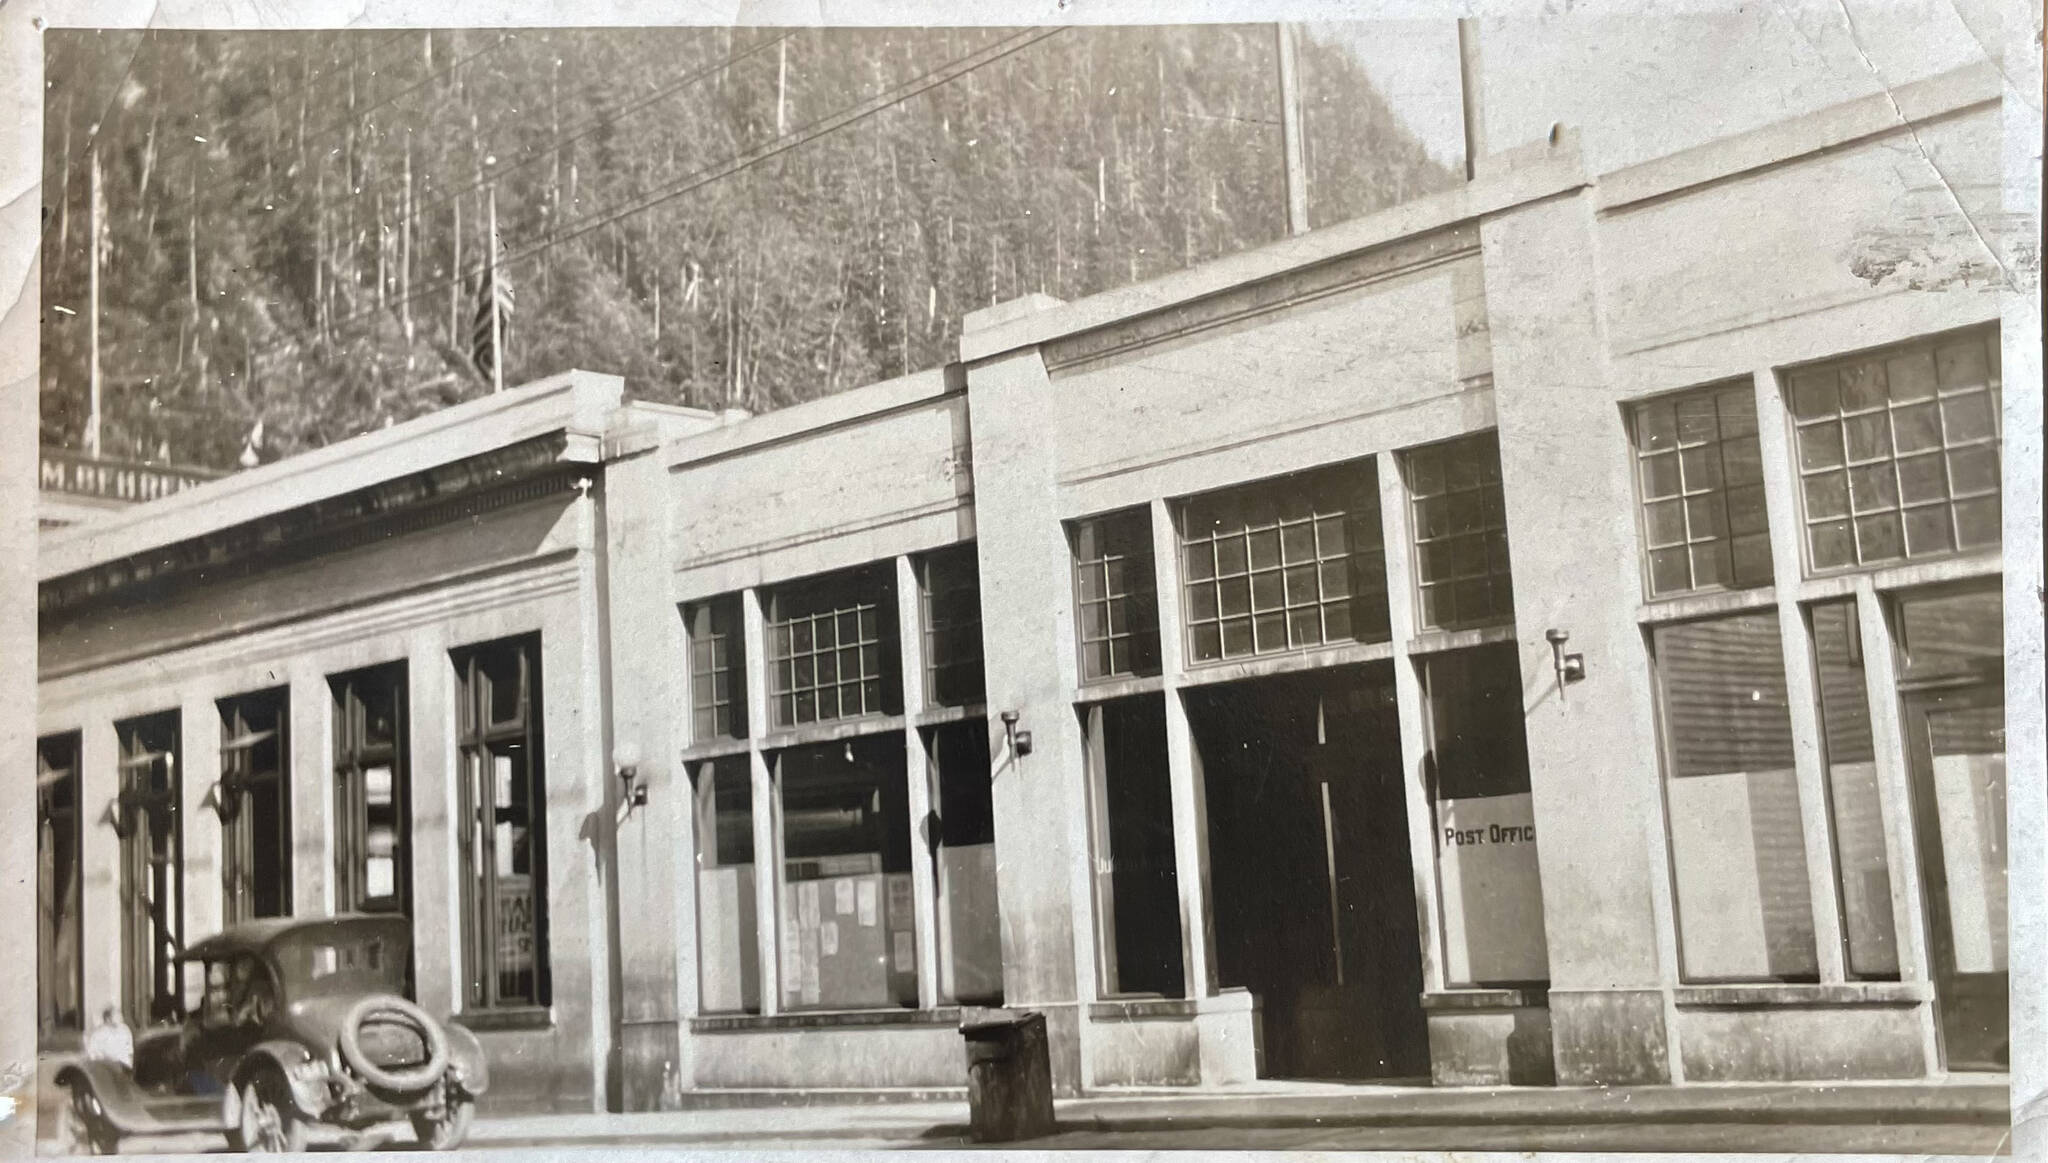 The Third Street post office in the 1914 Behrends Bank building. The department store name can be seen on a sign on the far left above the bank roof line. (Photo courtesy Anne Gruening)